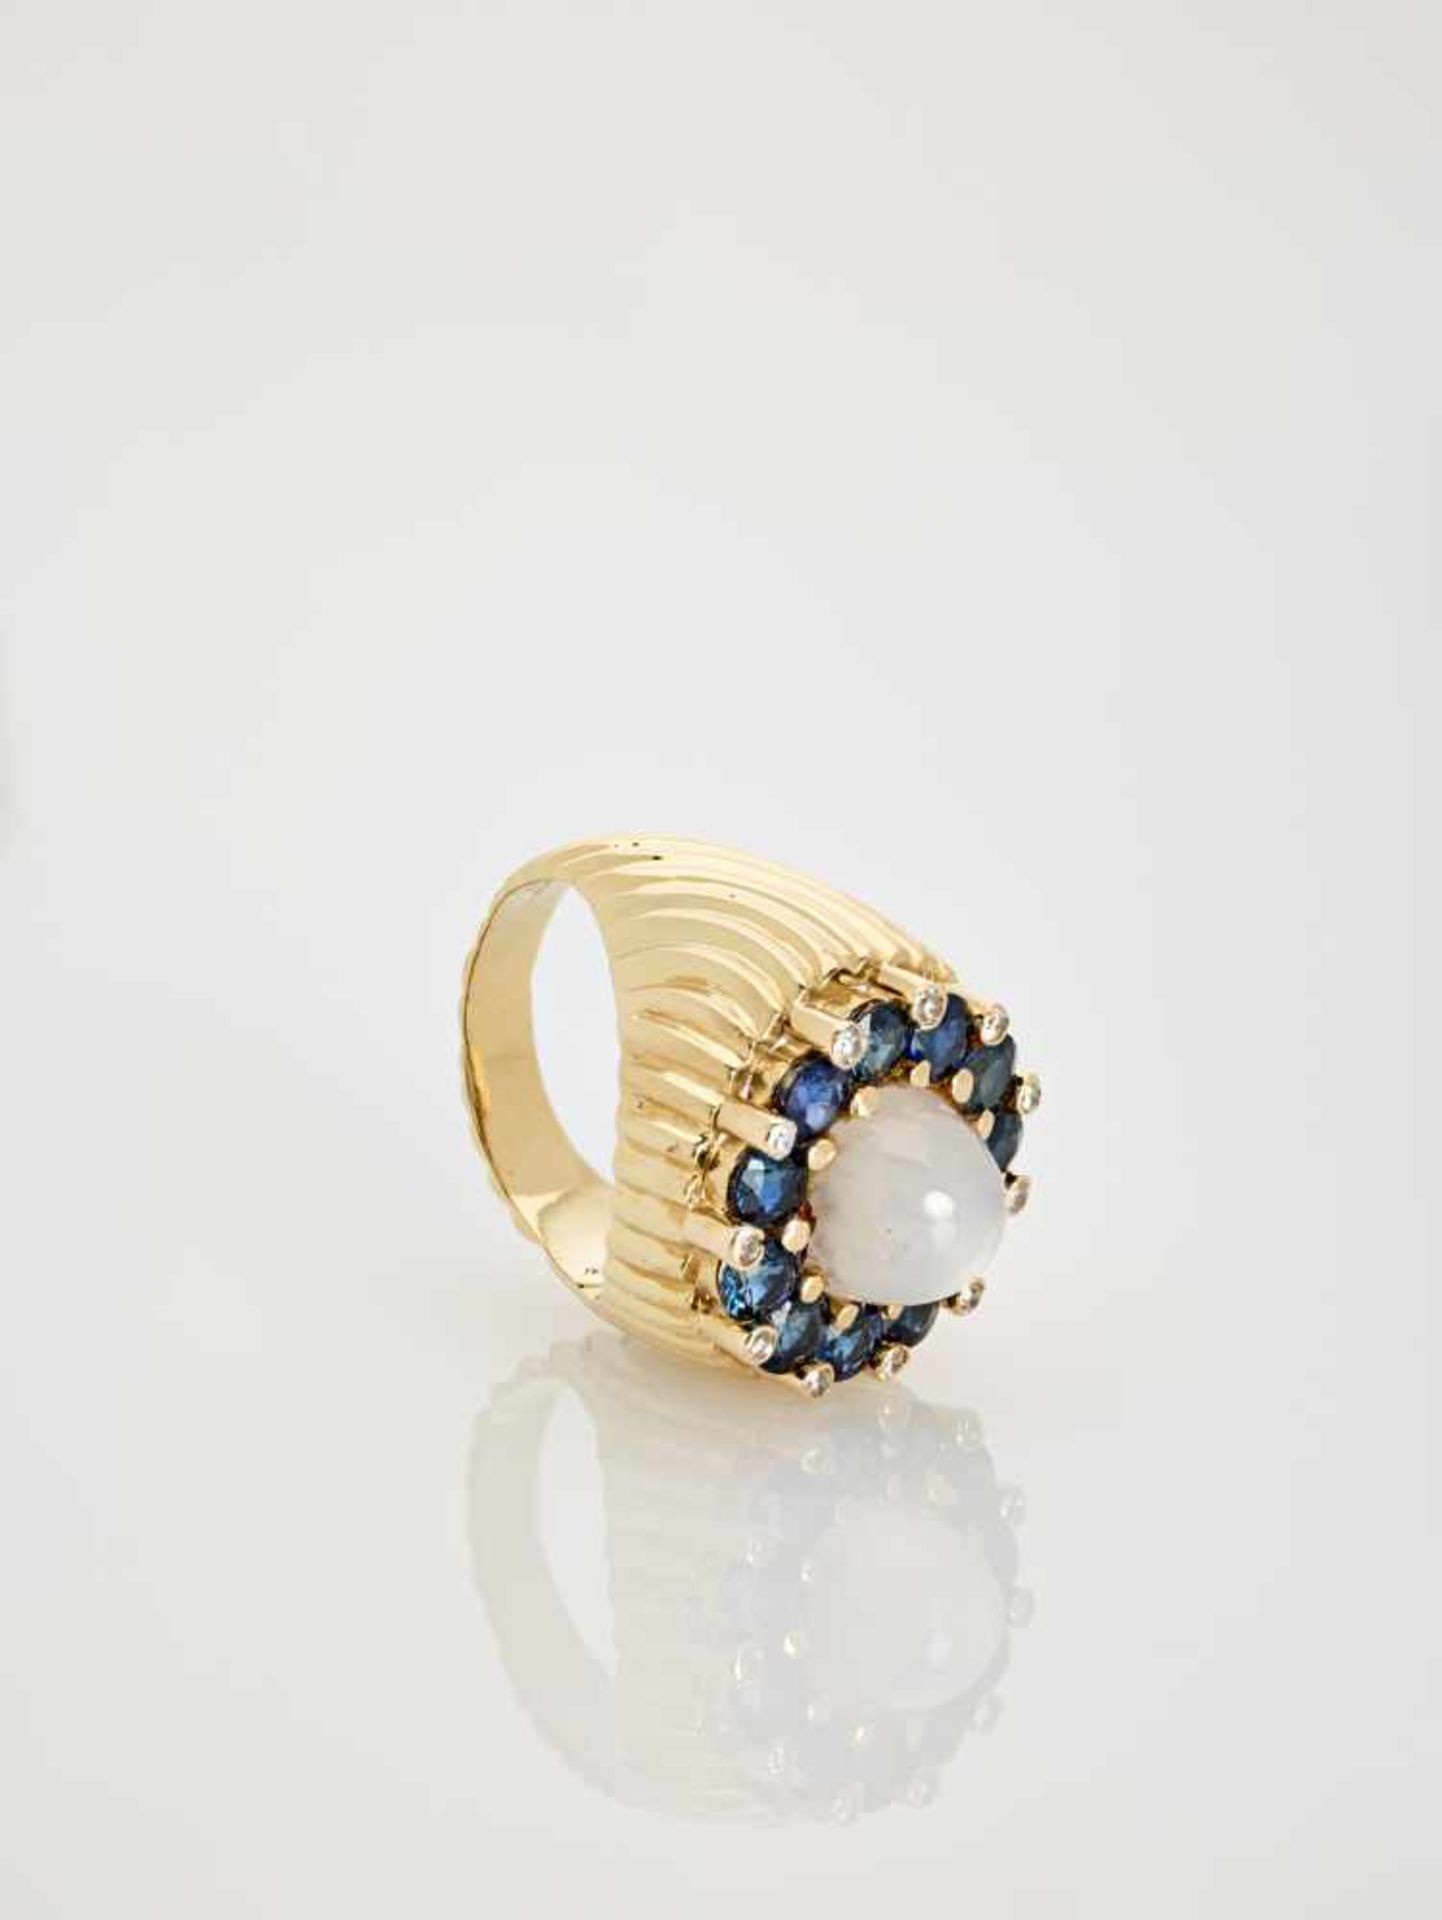 A SAPPHIRE, DIAMOND AND MOONSTONE YELLOW GOLD COCKTAIL RING BY PALTSCHOAustriaErwin Paltscho, - Image 3 of 7